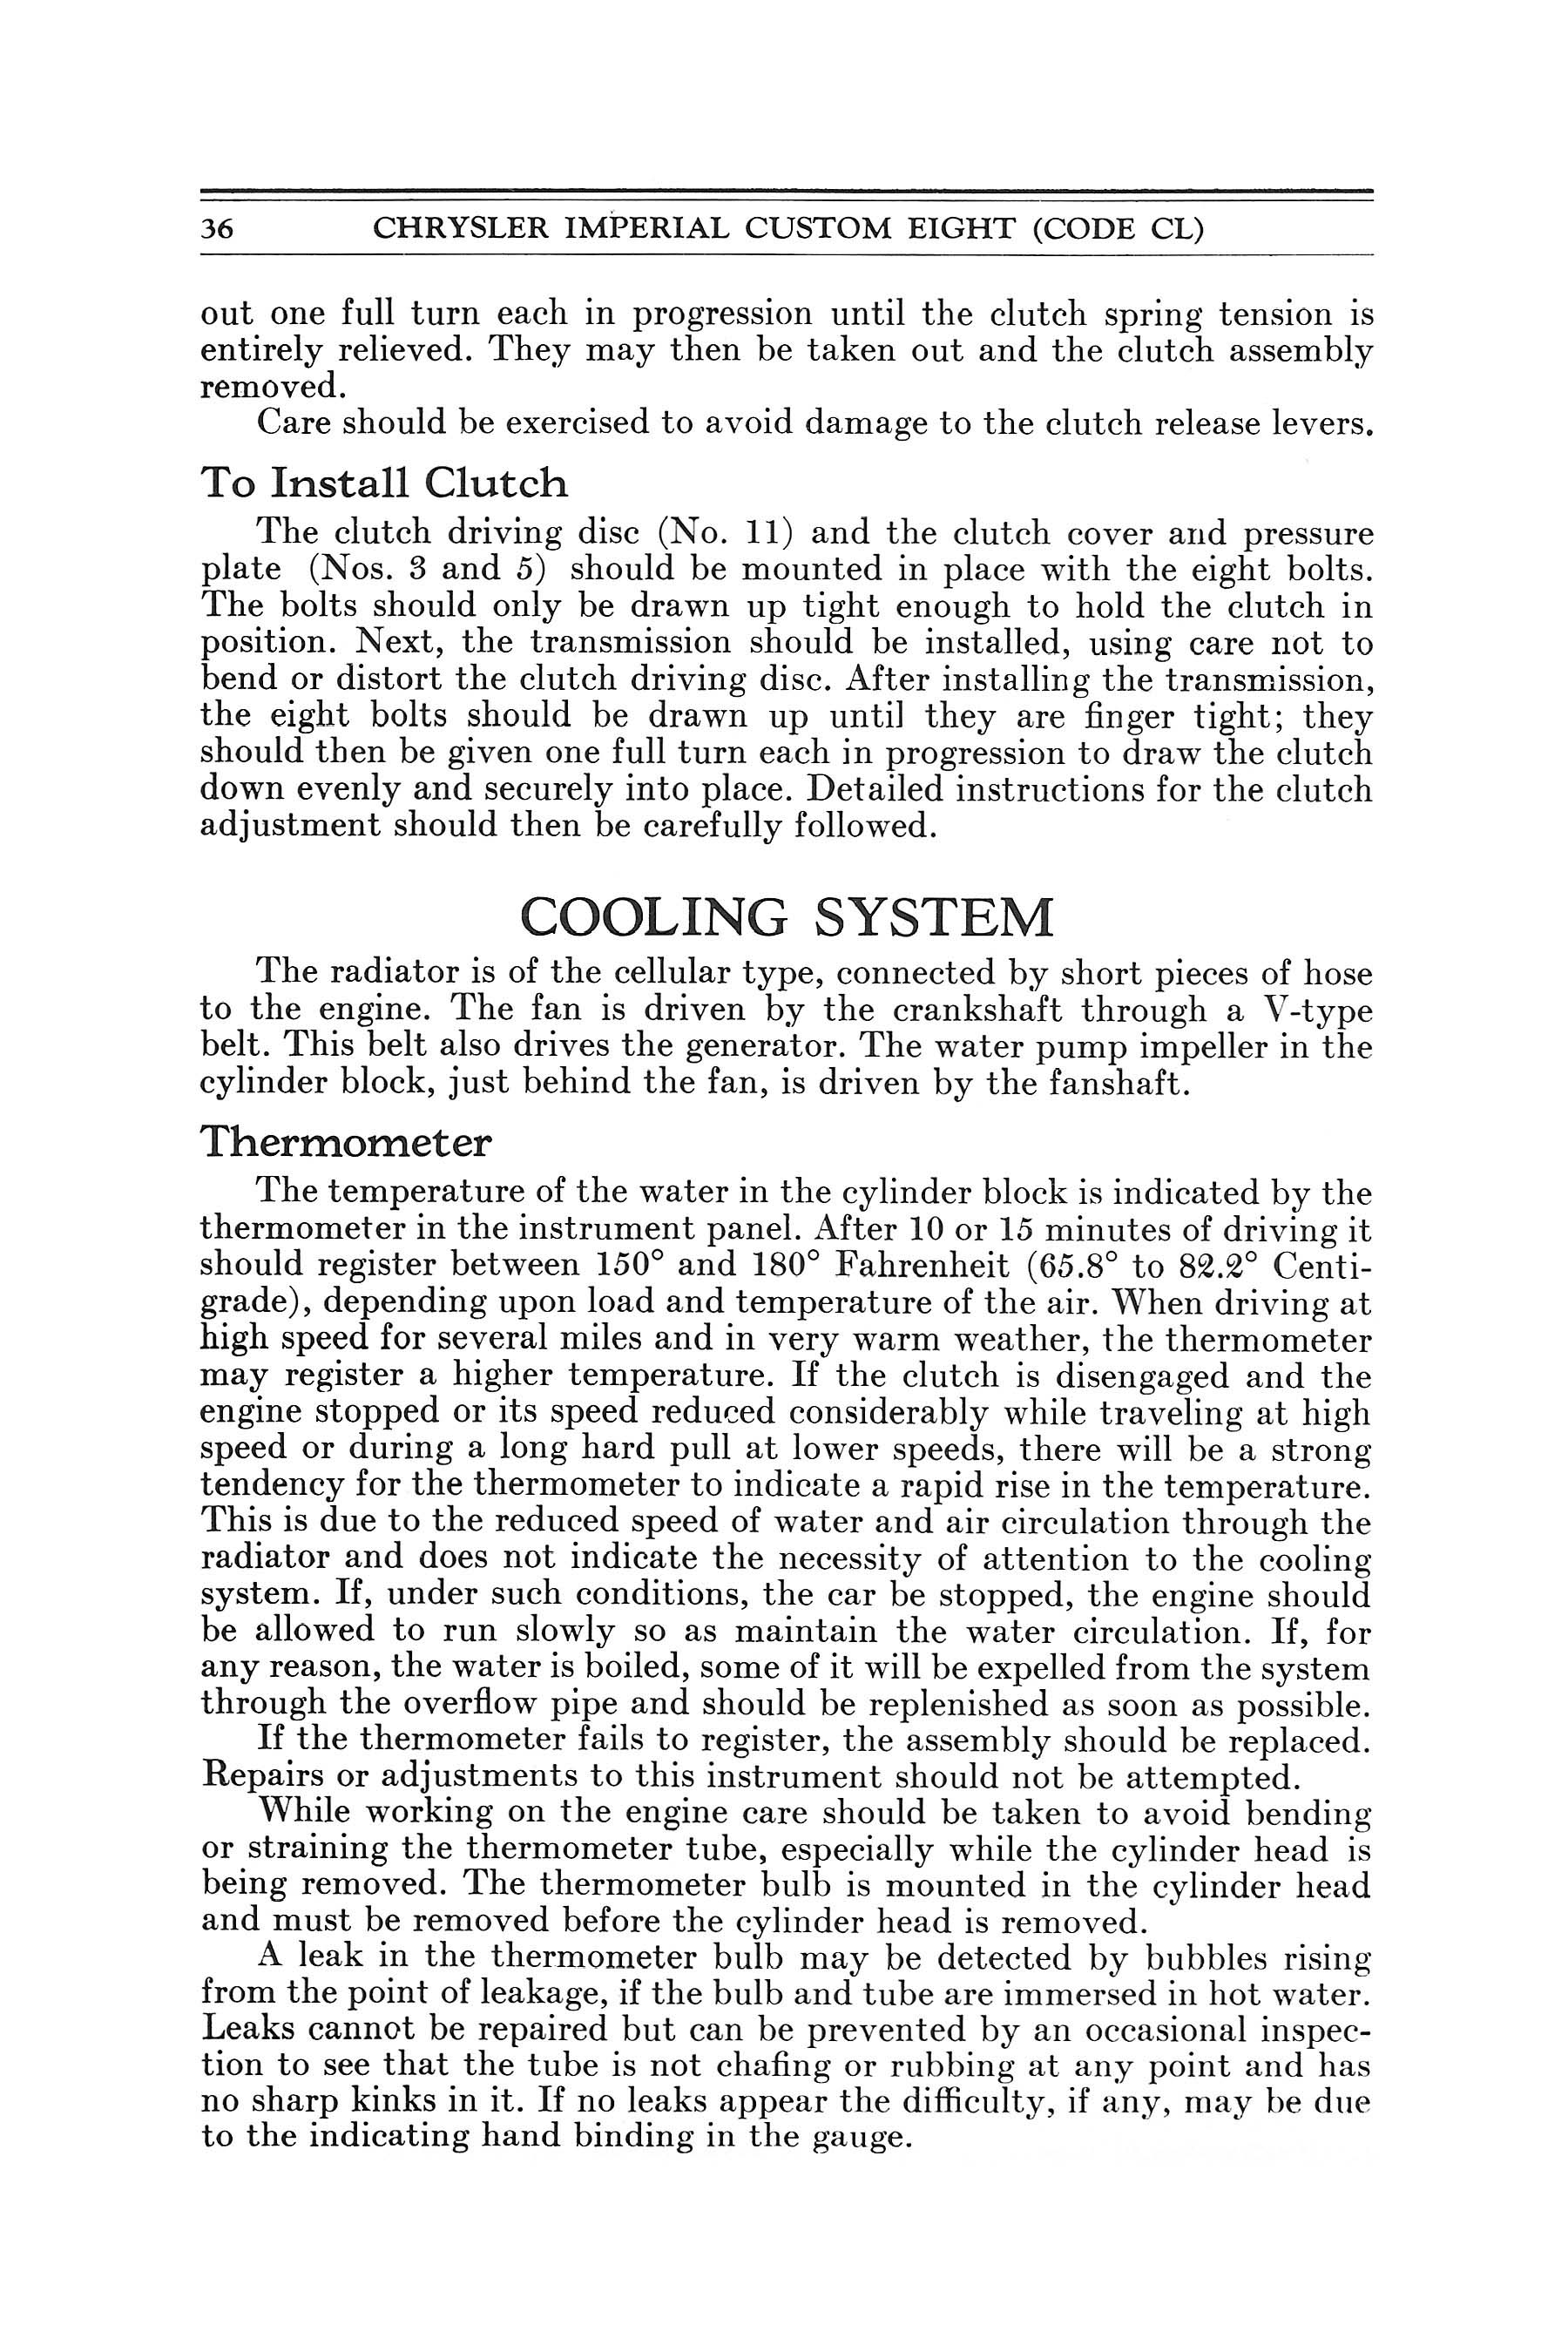 1932 Imperial Instruction Book-036